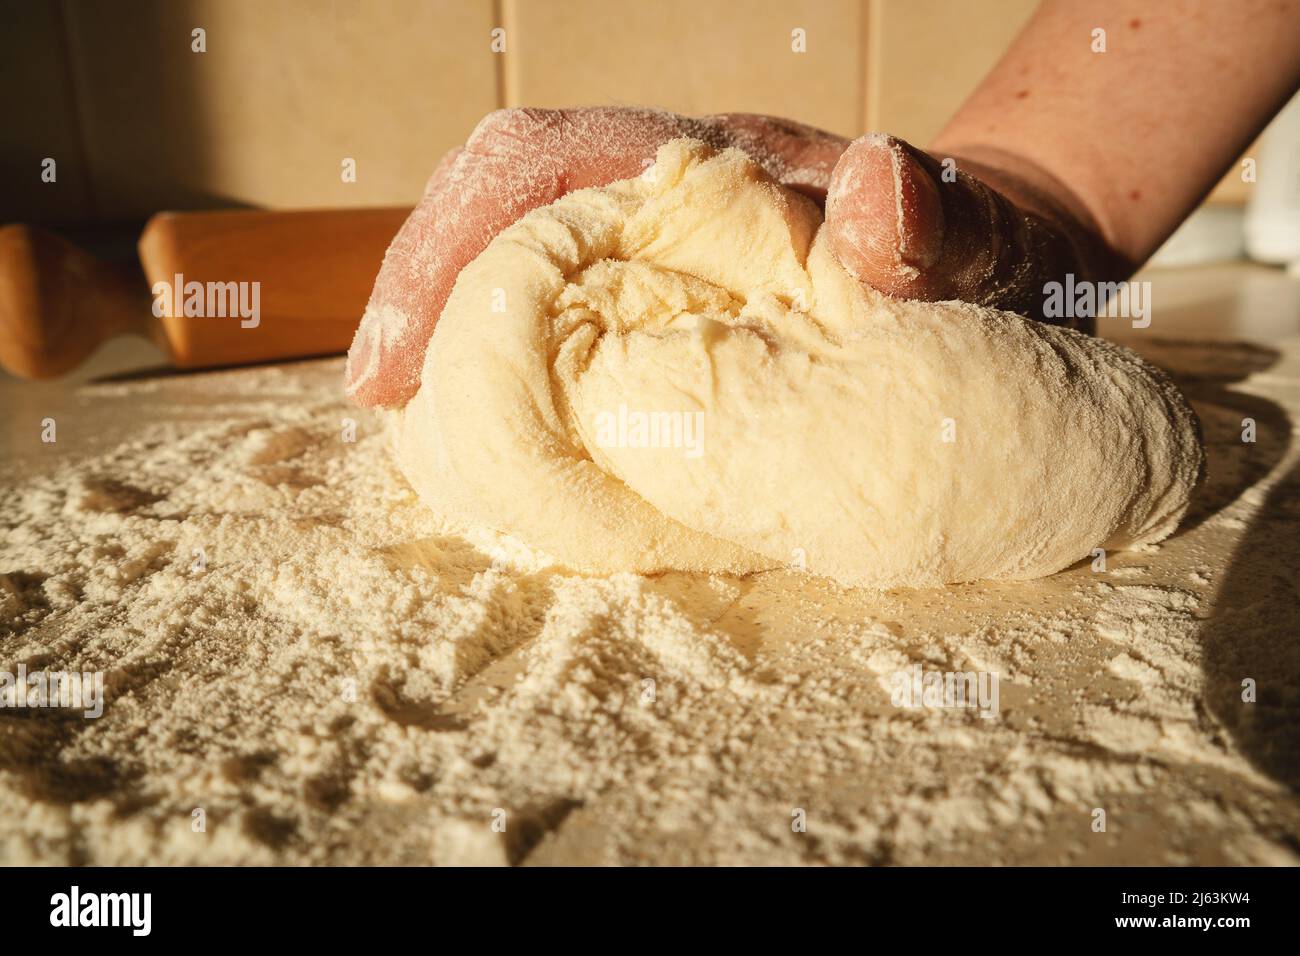 Preparing the dough for bread, kneading the dough with hands on the table. Stock Photo